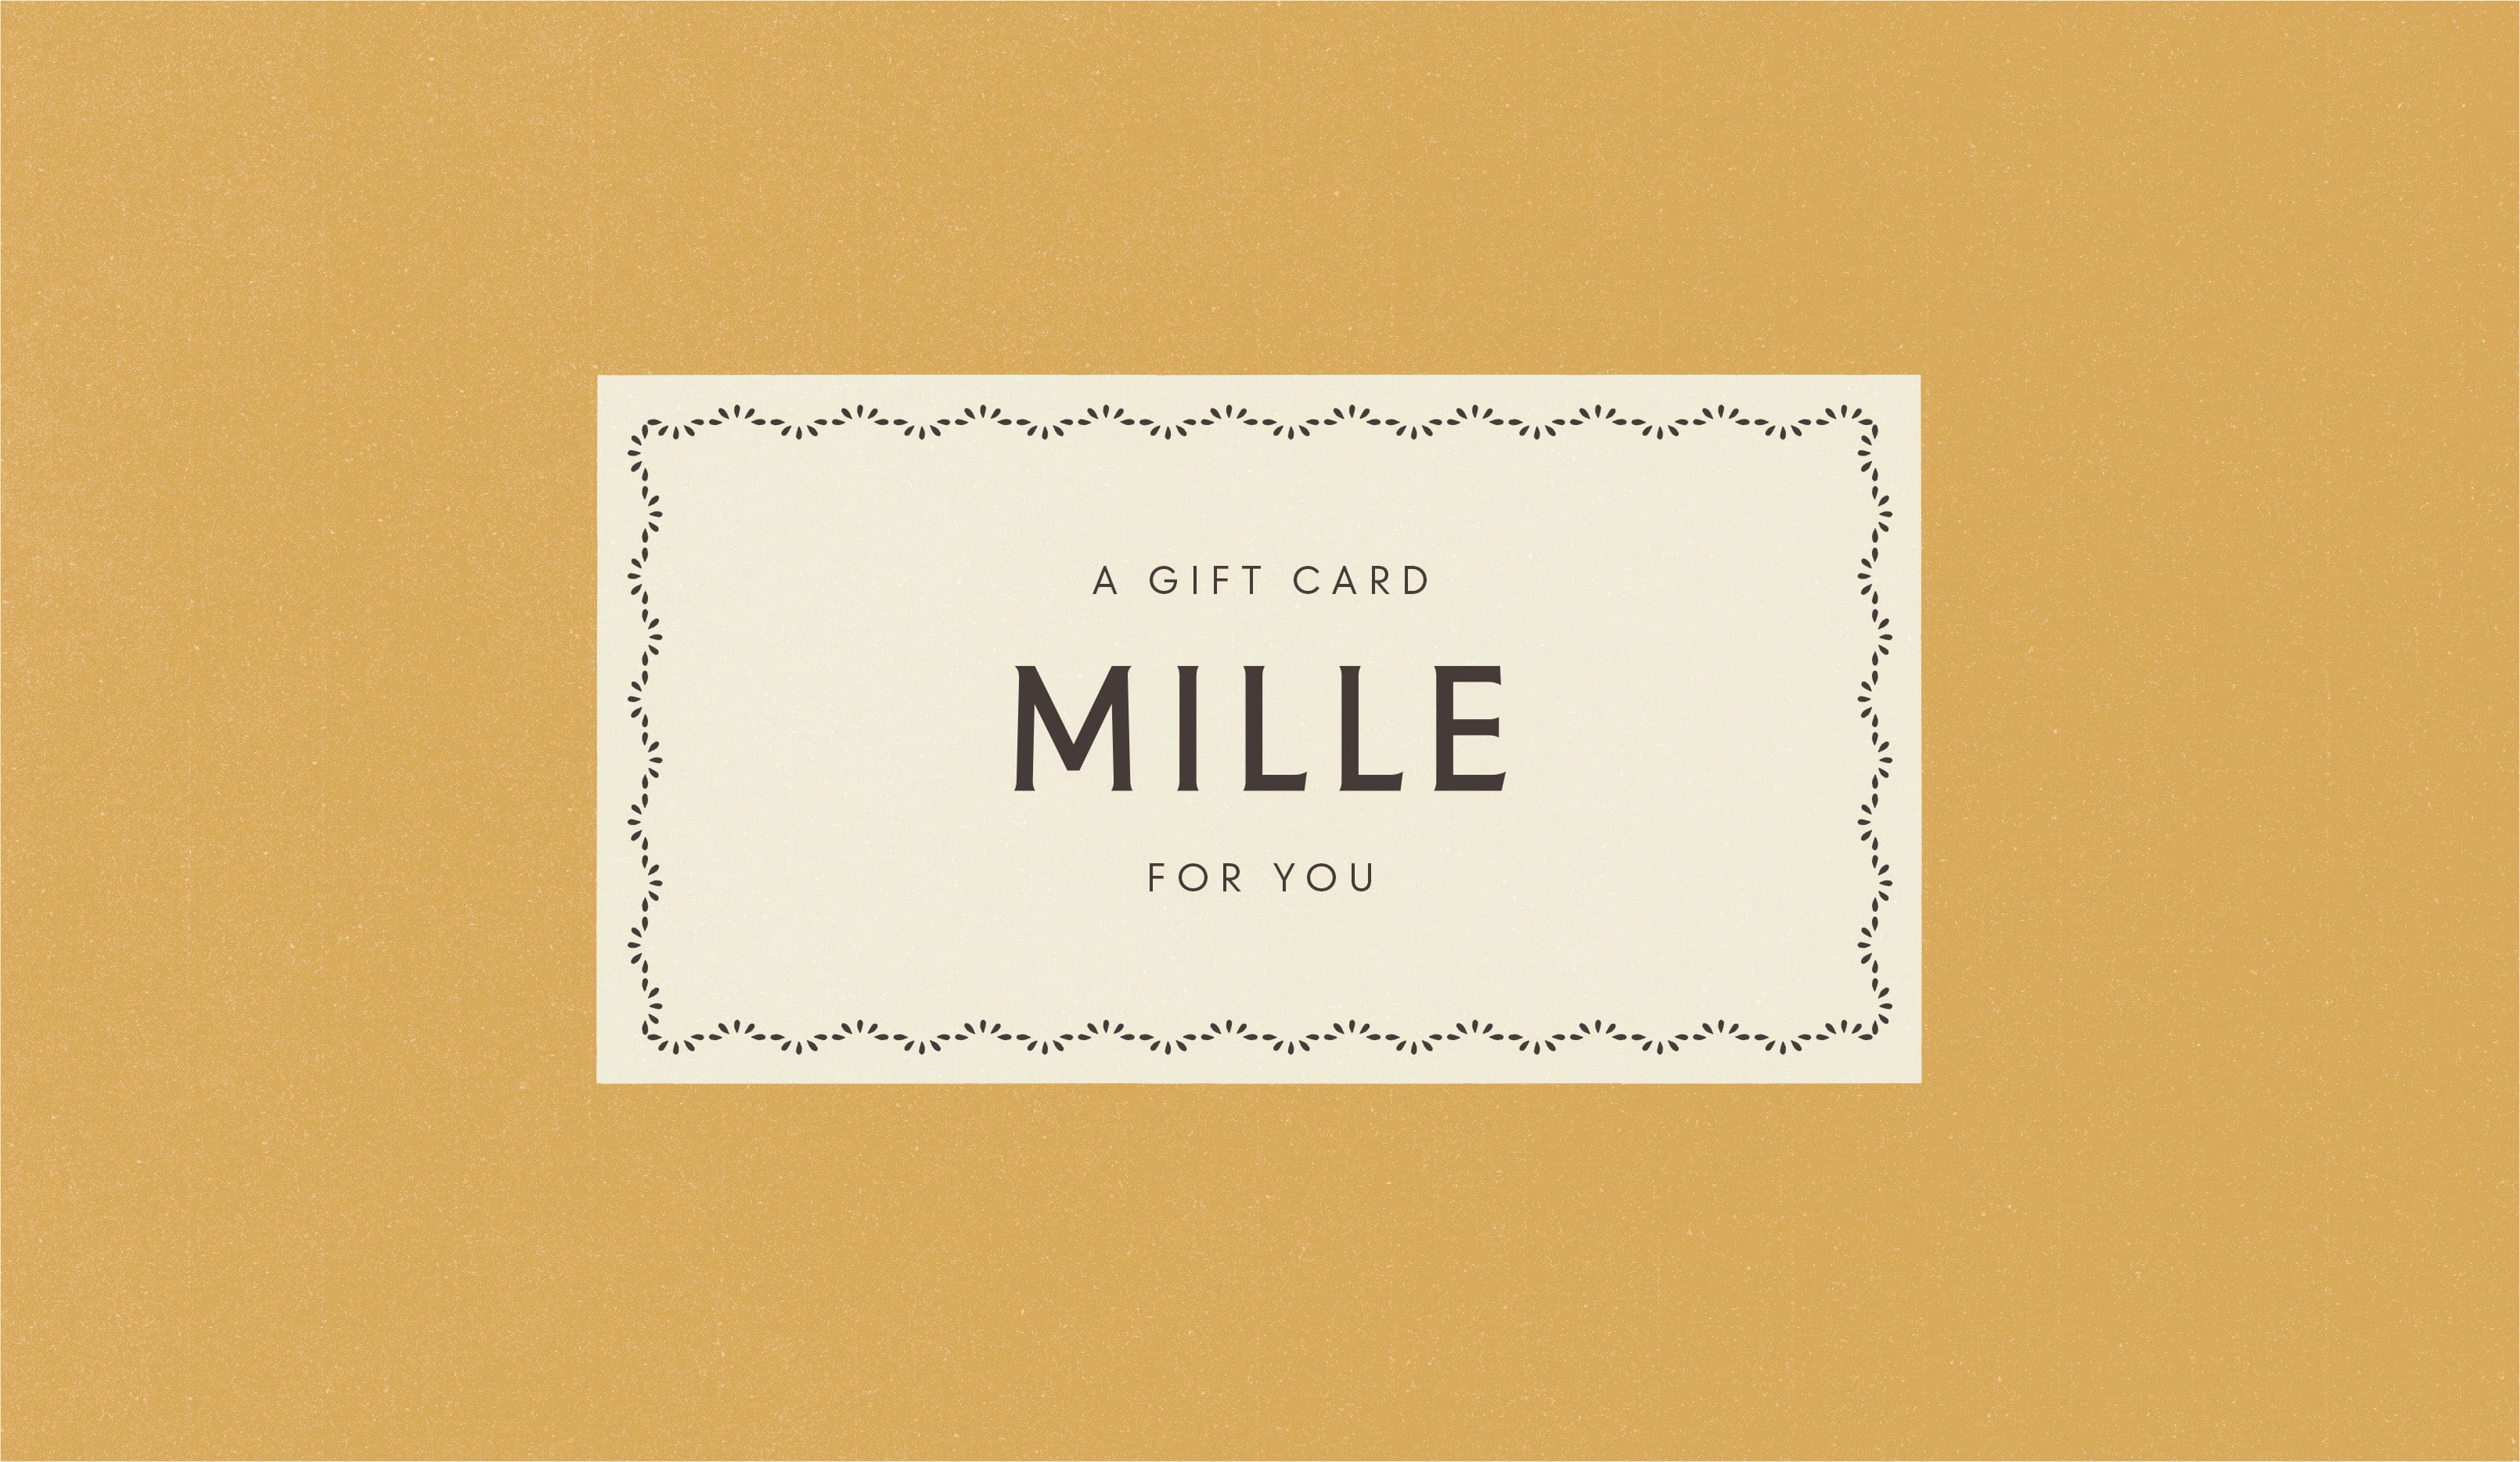 MILLE Gift Card Gift Card